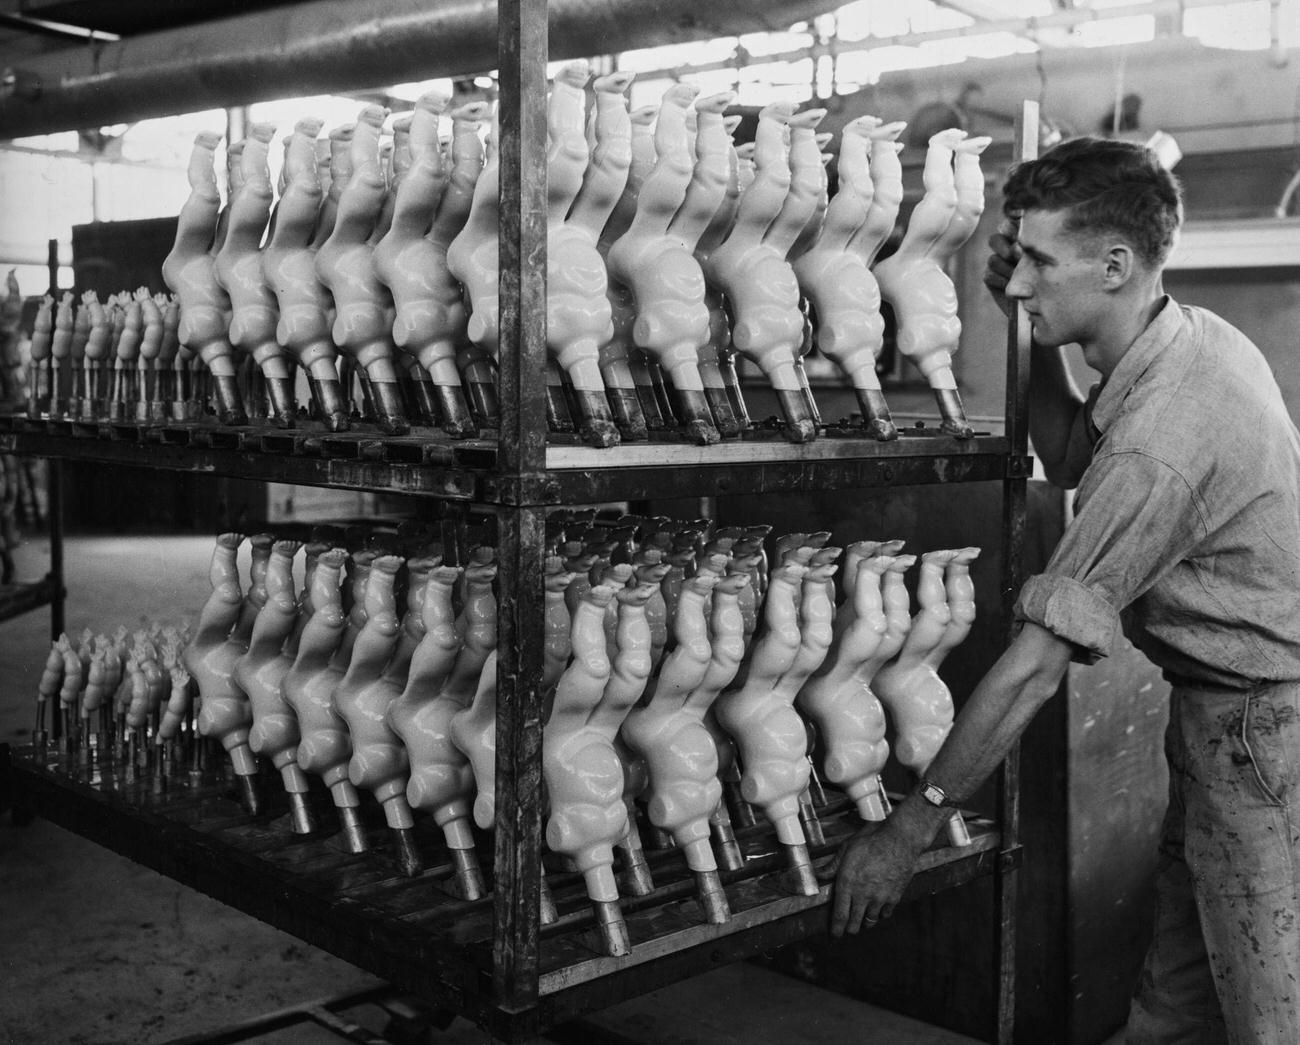 Man Pushing Carriage Of Headless Dolls In Brooklyn Toy Factory, November 19, 1934